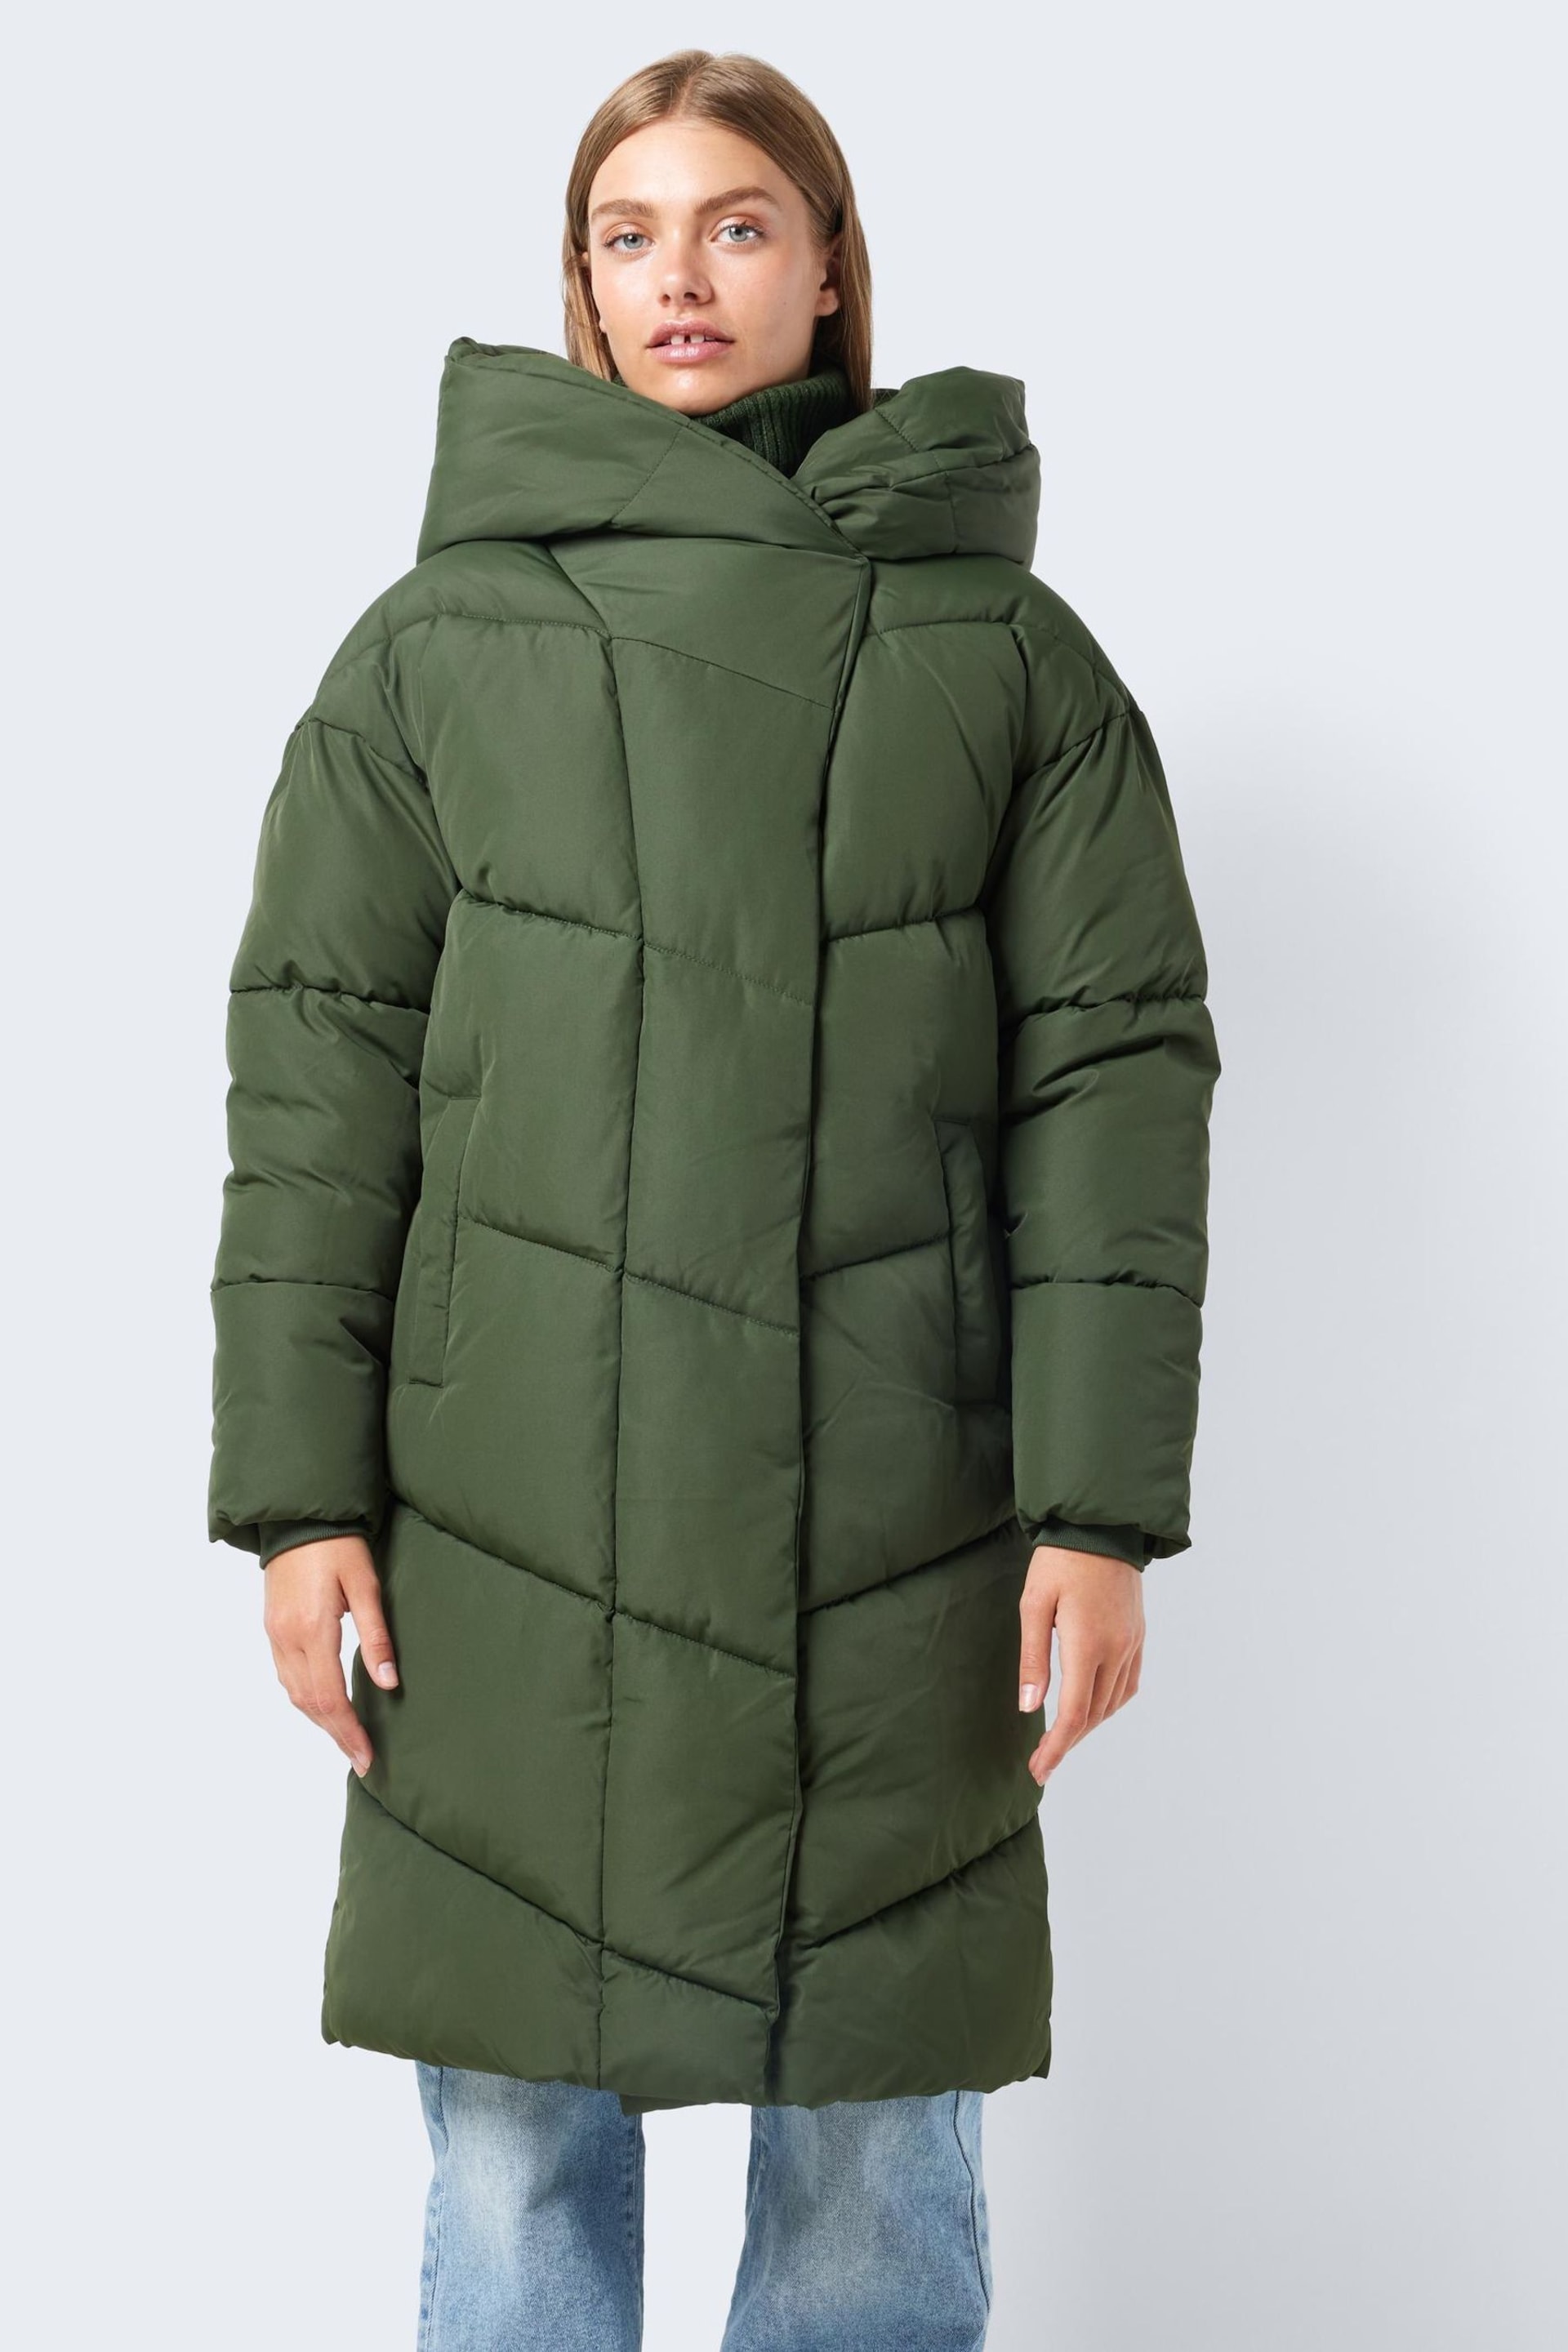 NOISY MAY Green Padded High Neck Hooded Quilted Coat - Image 3 of 8